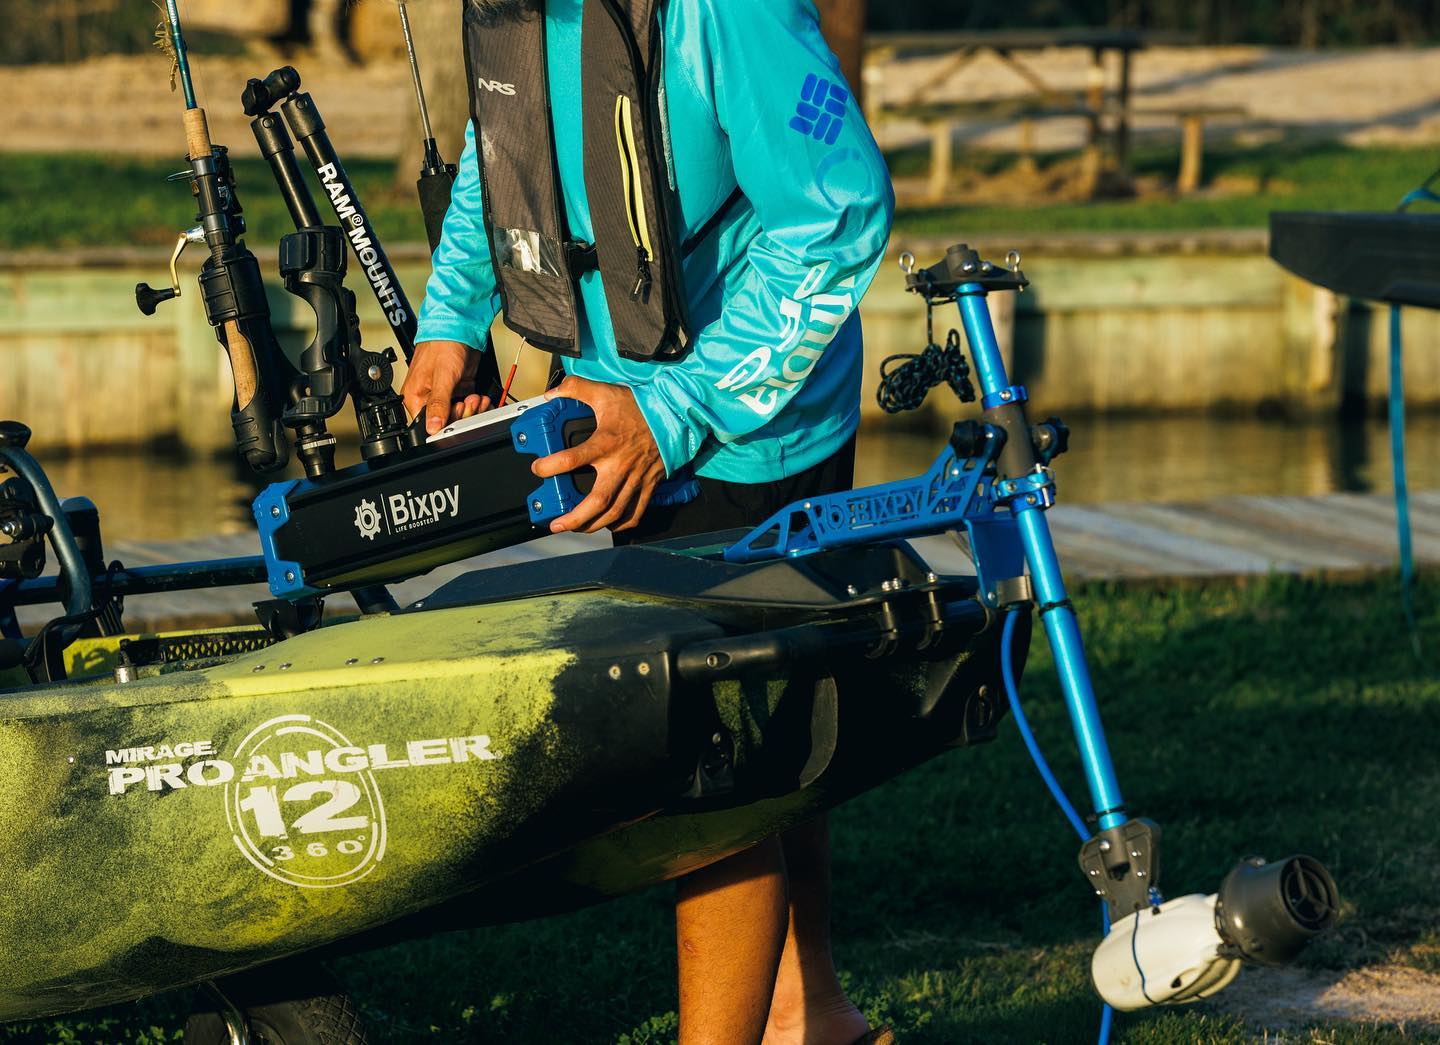 Bixpy battery being placed on a Pro Angler kayak that features a Bixpy K-1 Motor